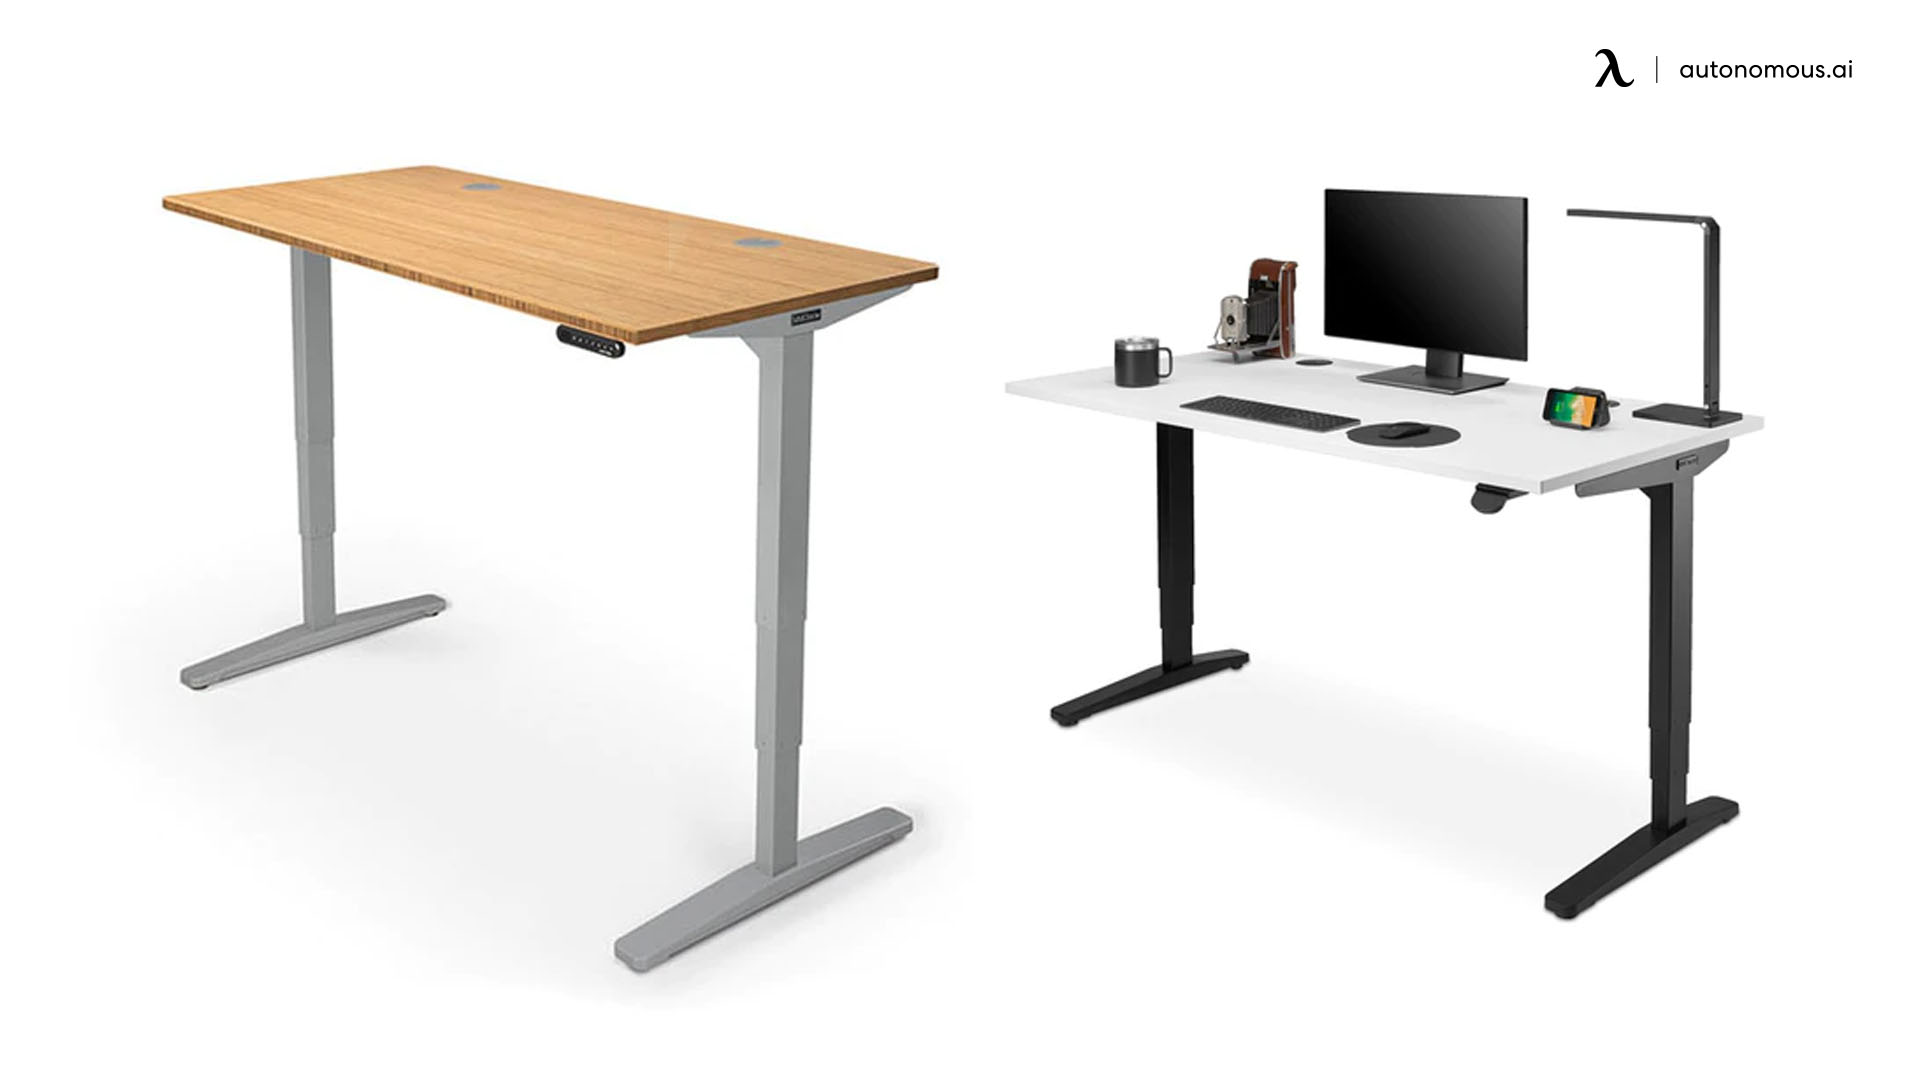 C-Frame vs. T-Frame Standing Desks: Which is Right for You?